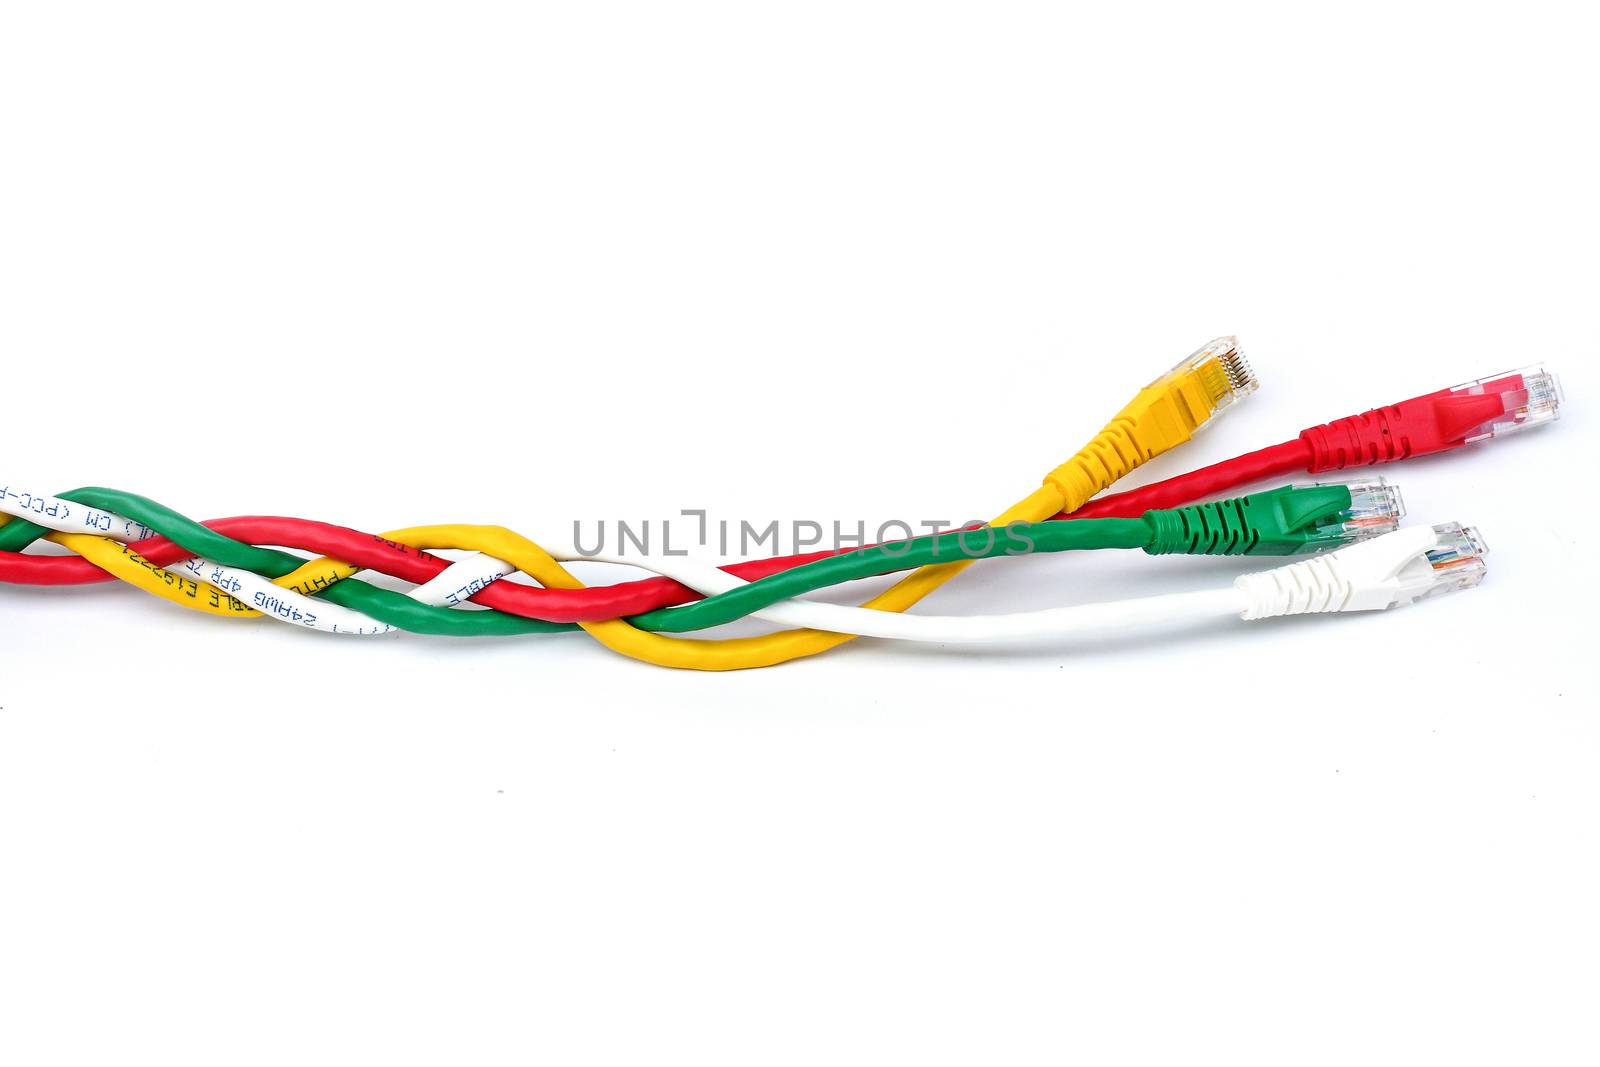 USB cable isolated on white background